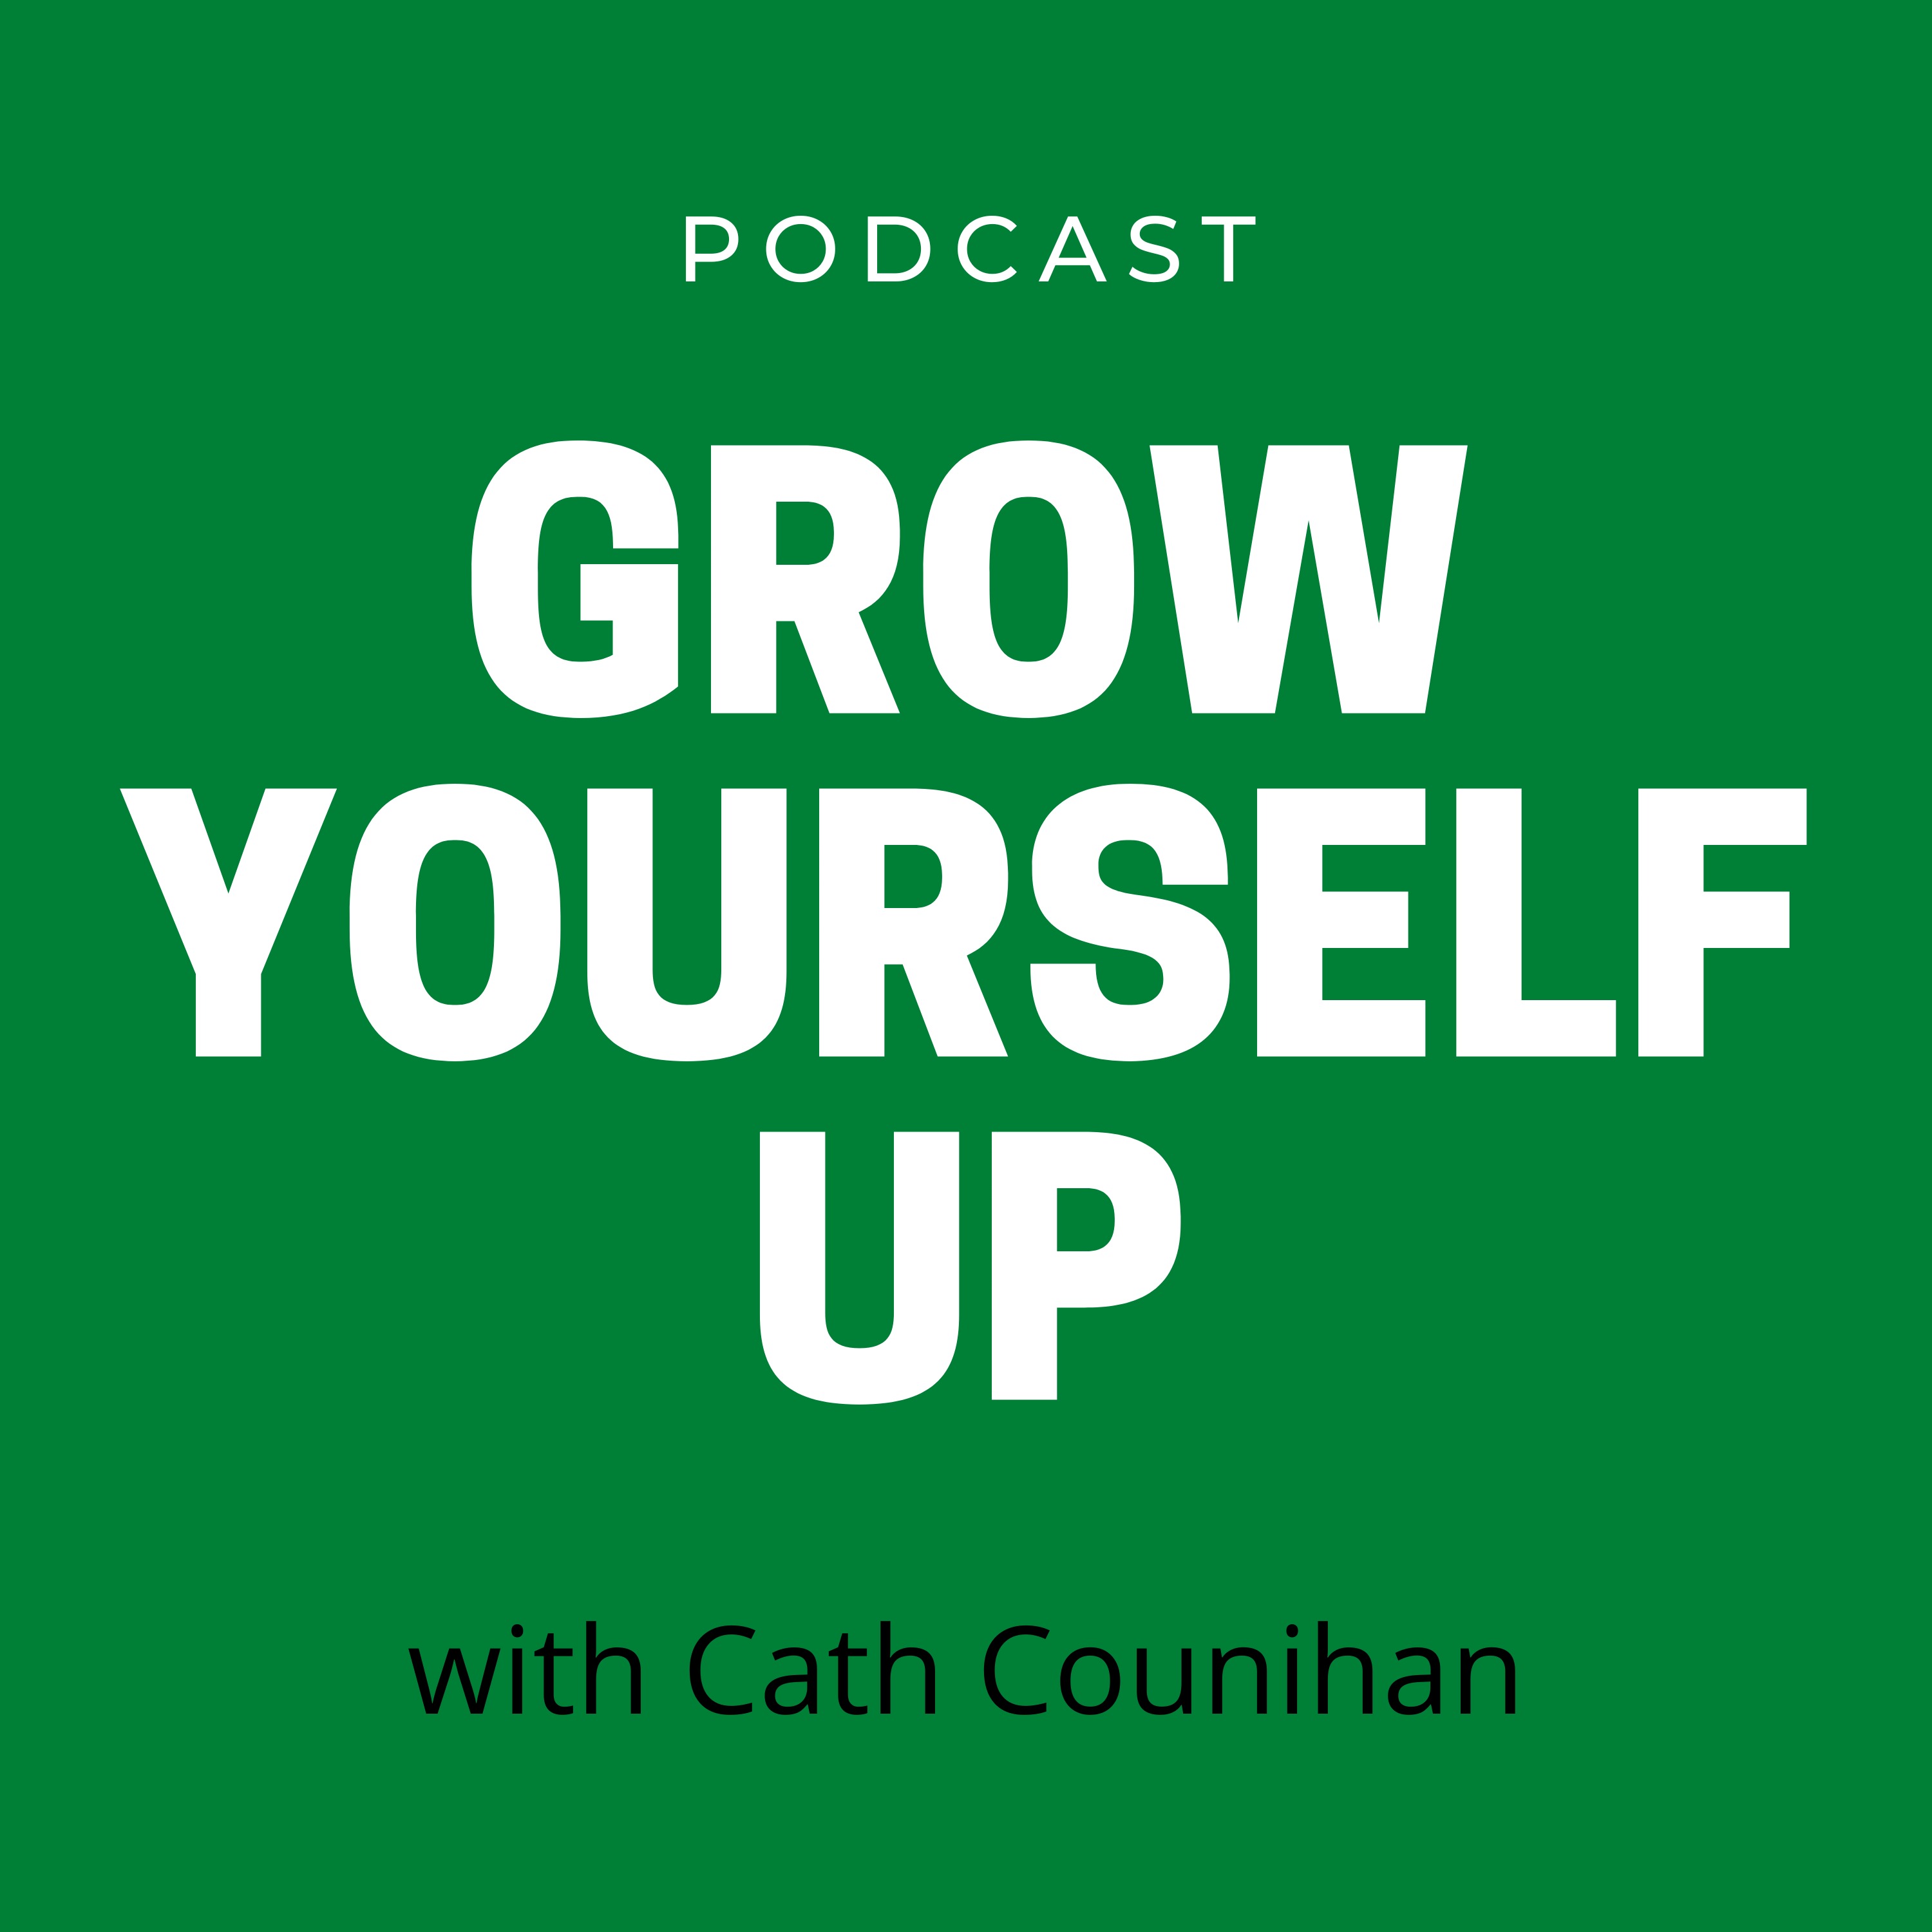 Ep 98: Intrusions, Control and Growing Up in Motherhood with Anna Butcher (Re-release)